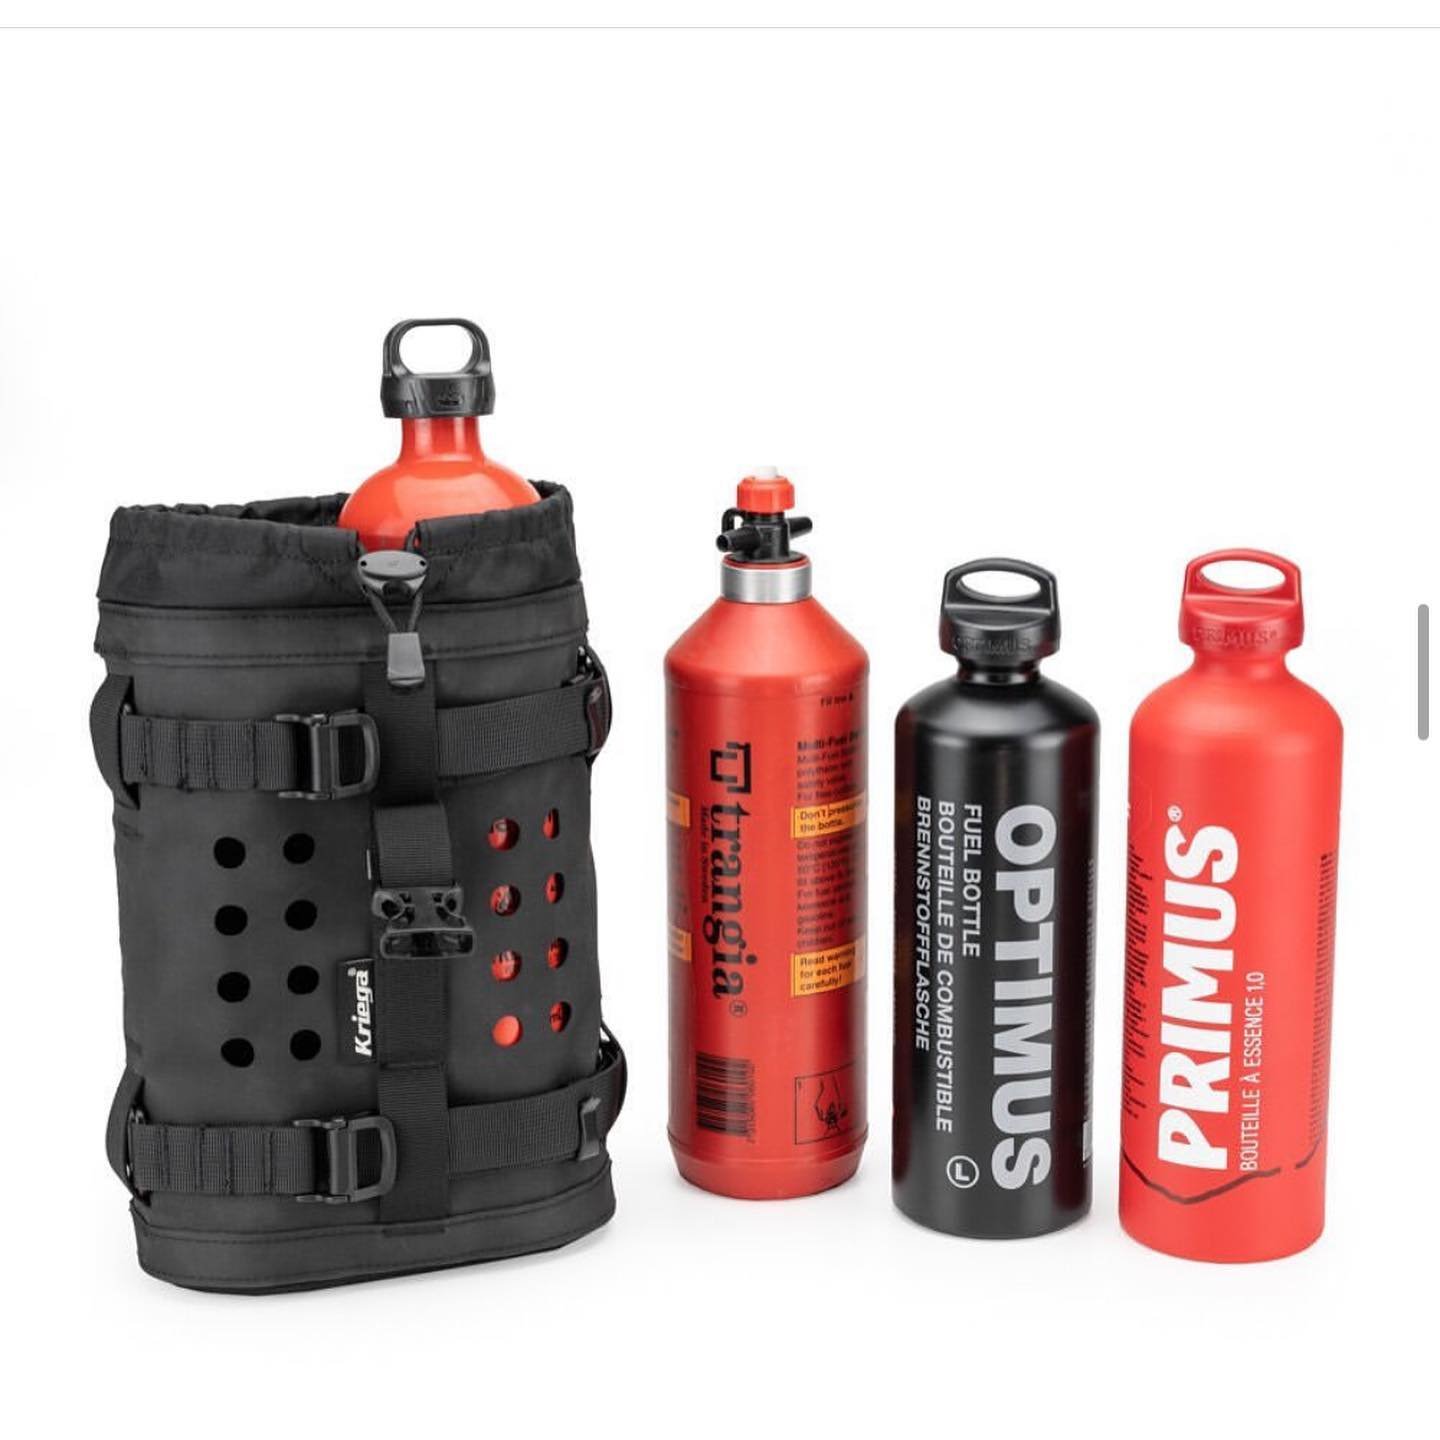 The OS-BOTTLE attachment adds to our modular luggage systems making transporting liquids or fuels easy &amp; safe. 
Carries 2 x 1-litre bottles or 1 x 2-litre Jerry can.
Swipe for inspiration